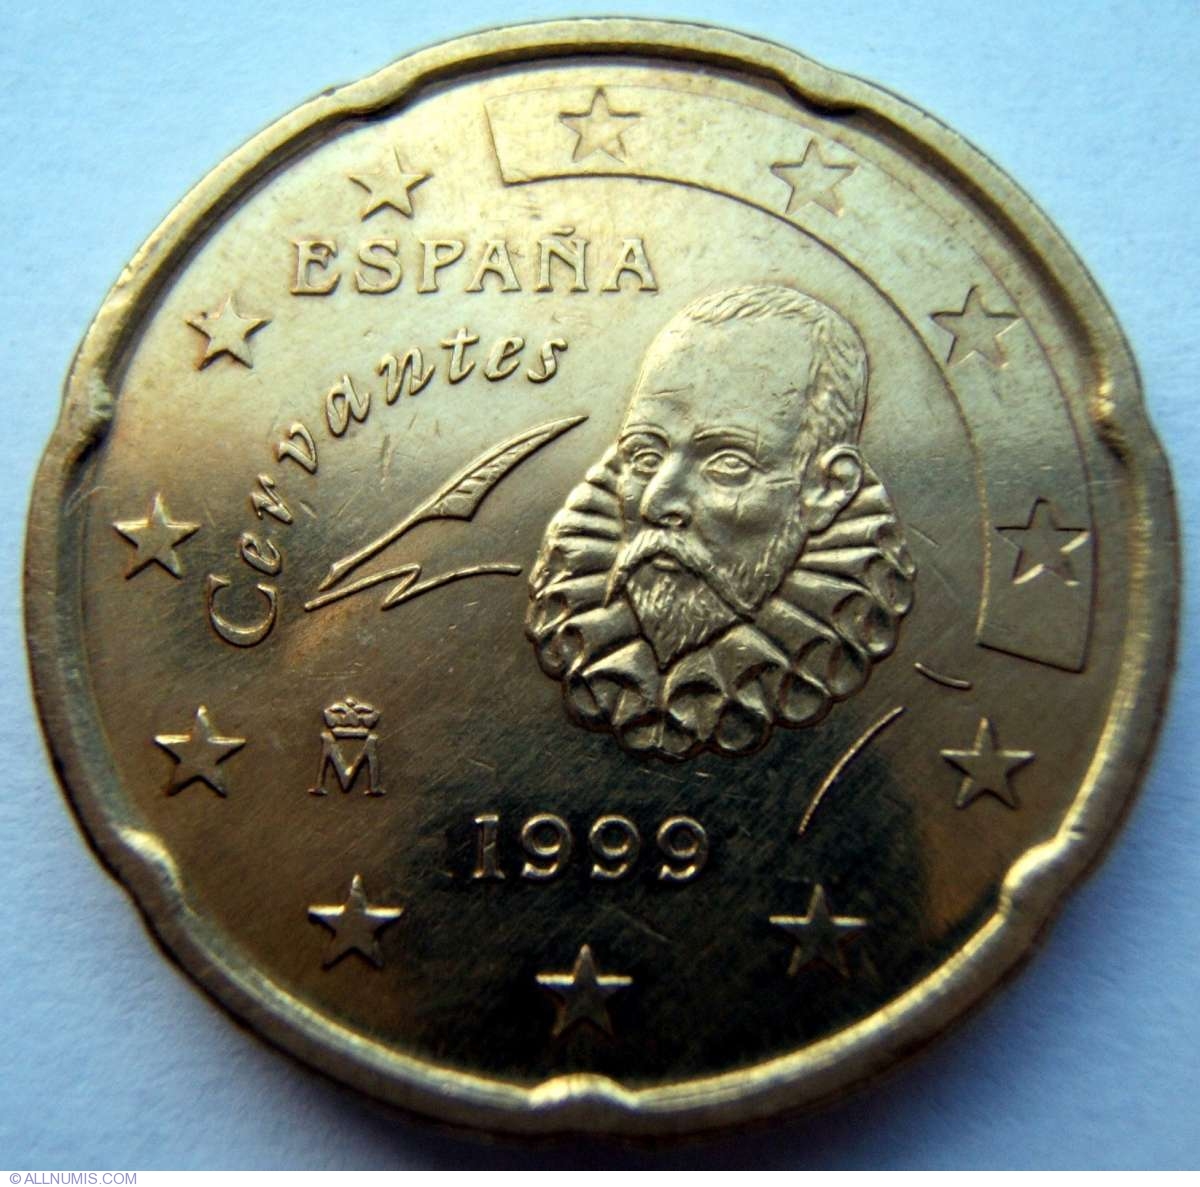 value of 20 euro cent